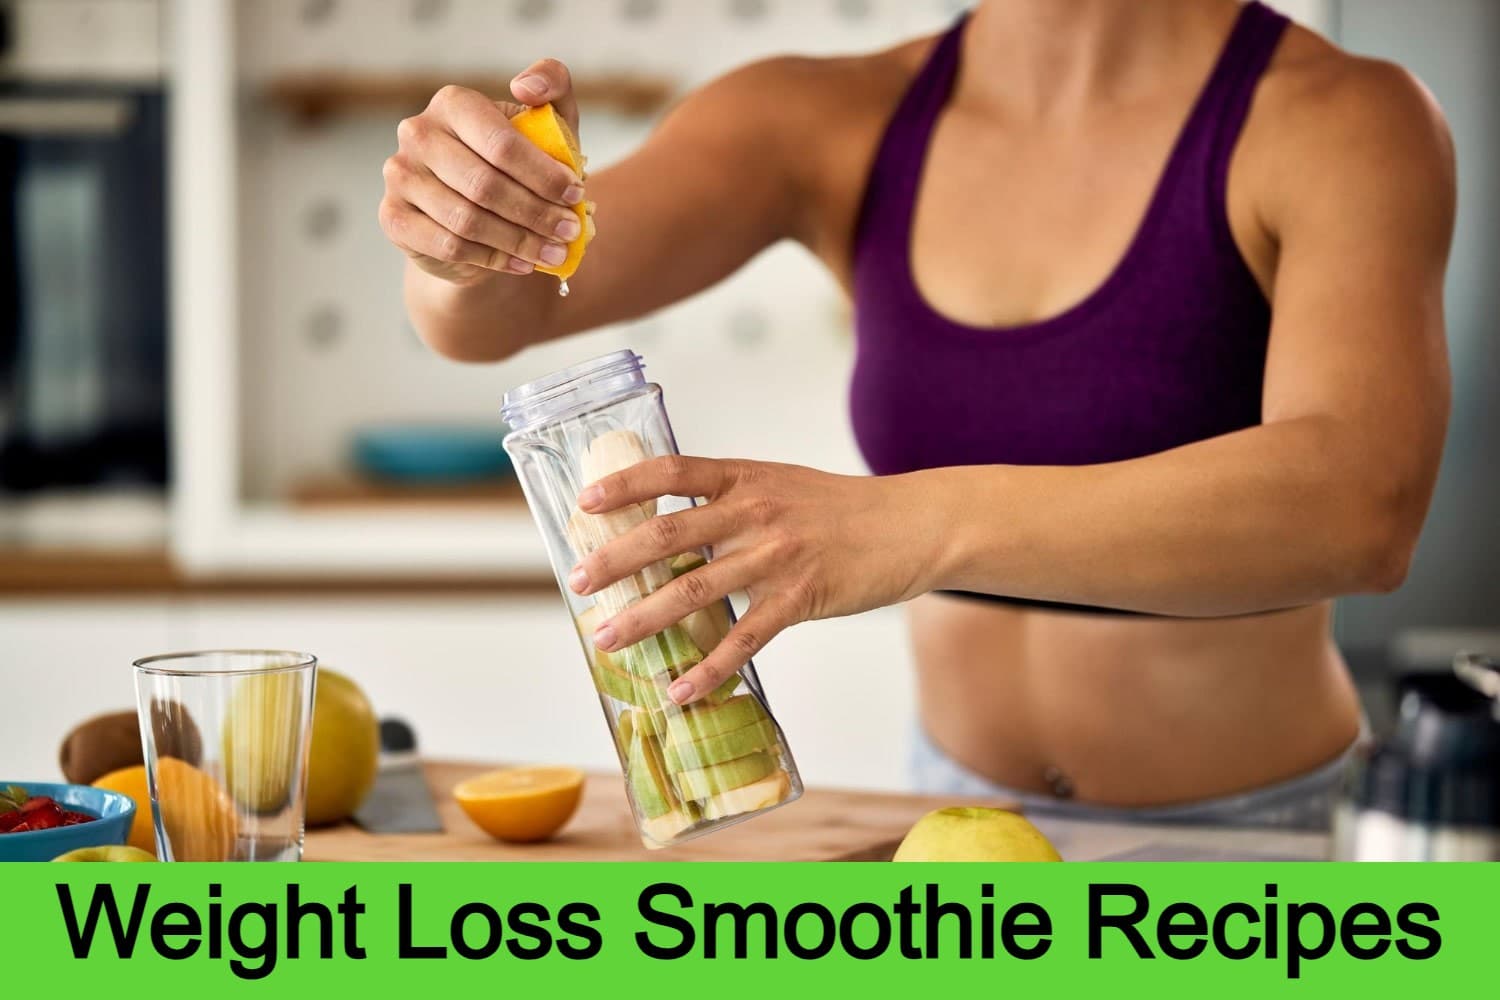 Download Free Ebook for Healthy Weight Loss Smoothies